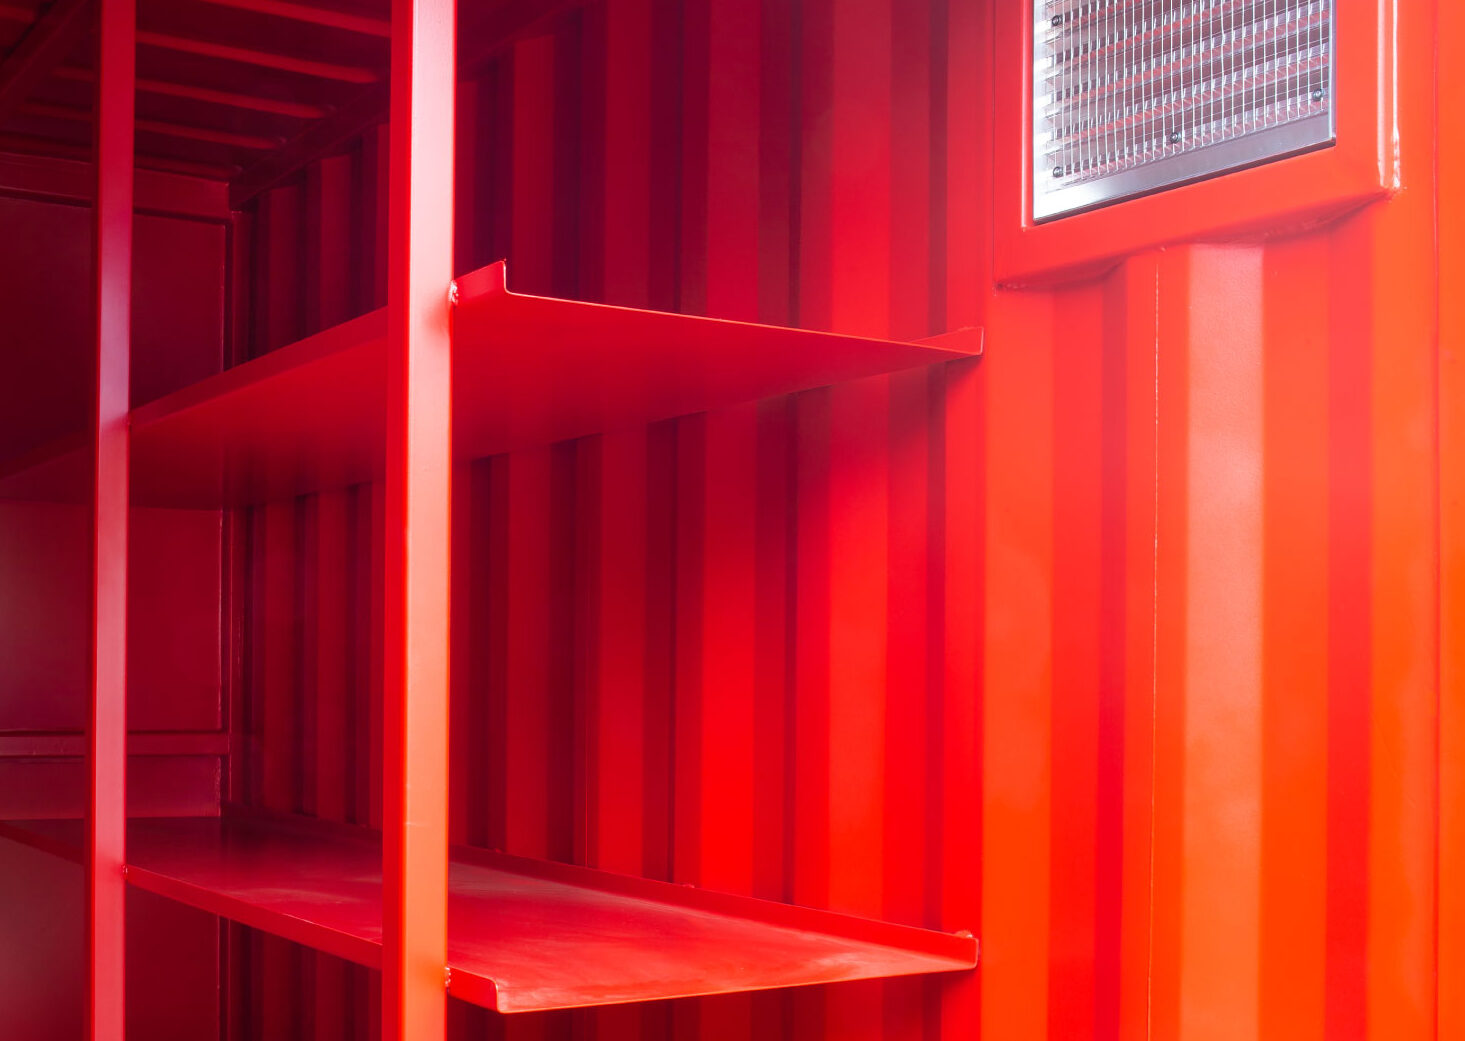 built in shelving in red chemical store container